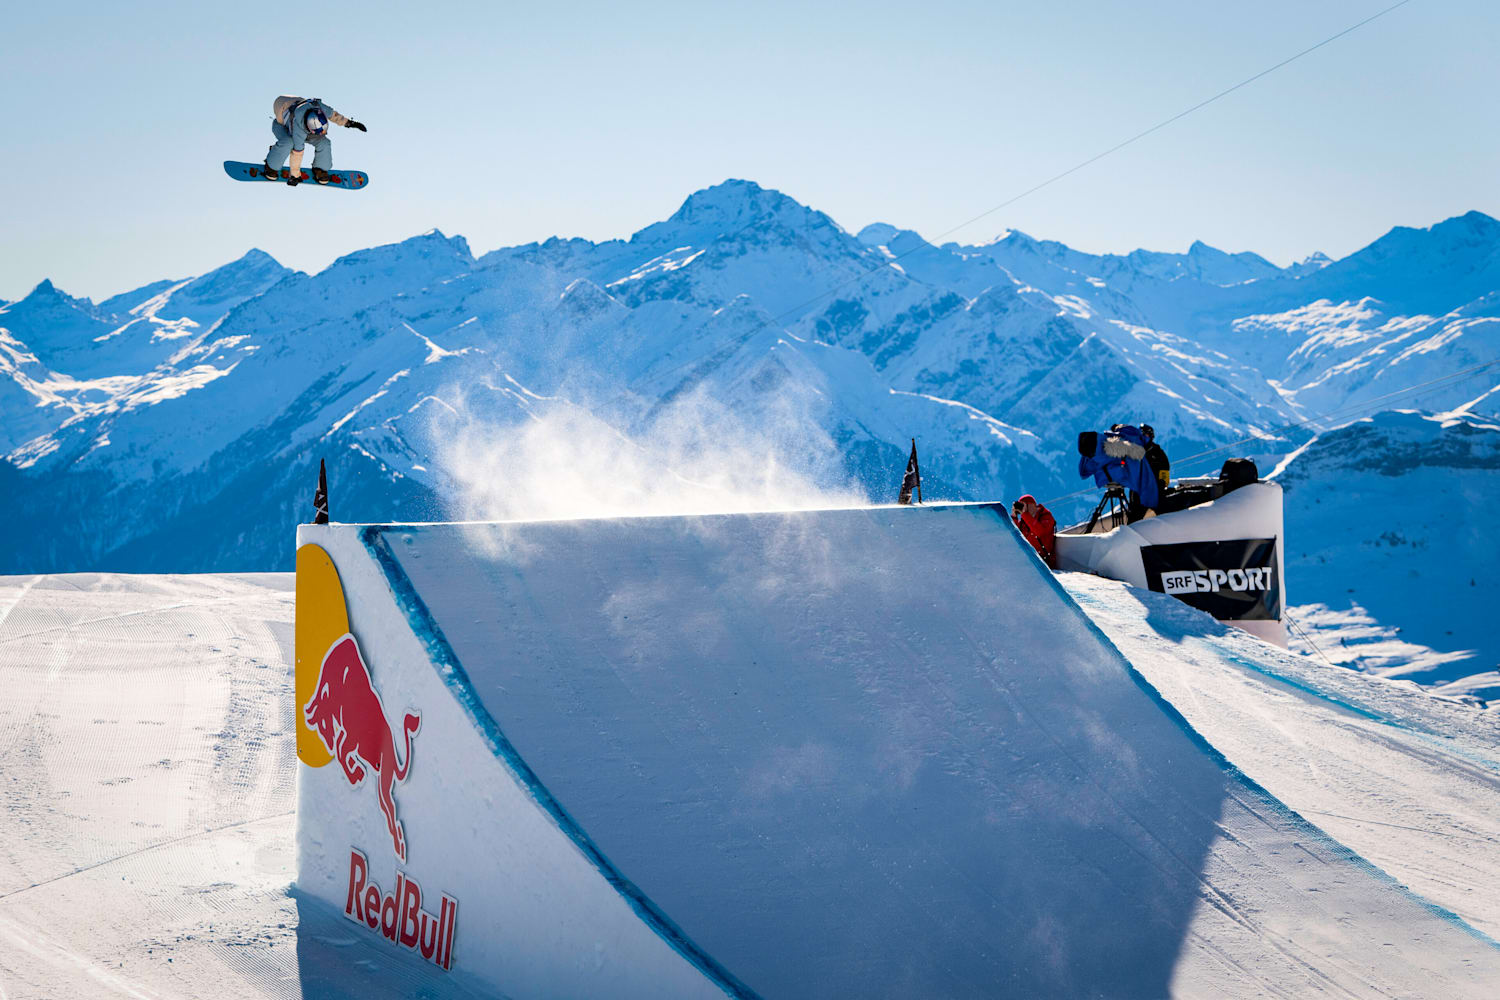 Laax Open event info and videos